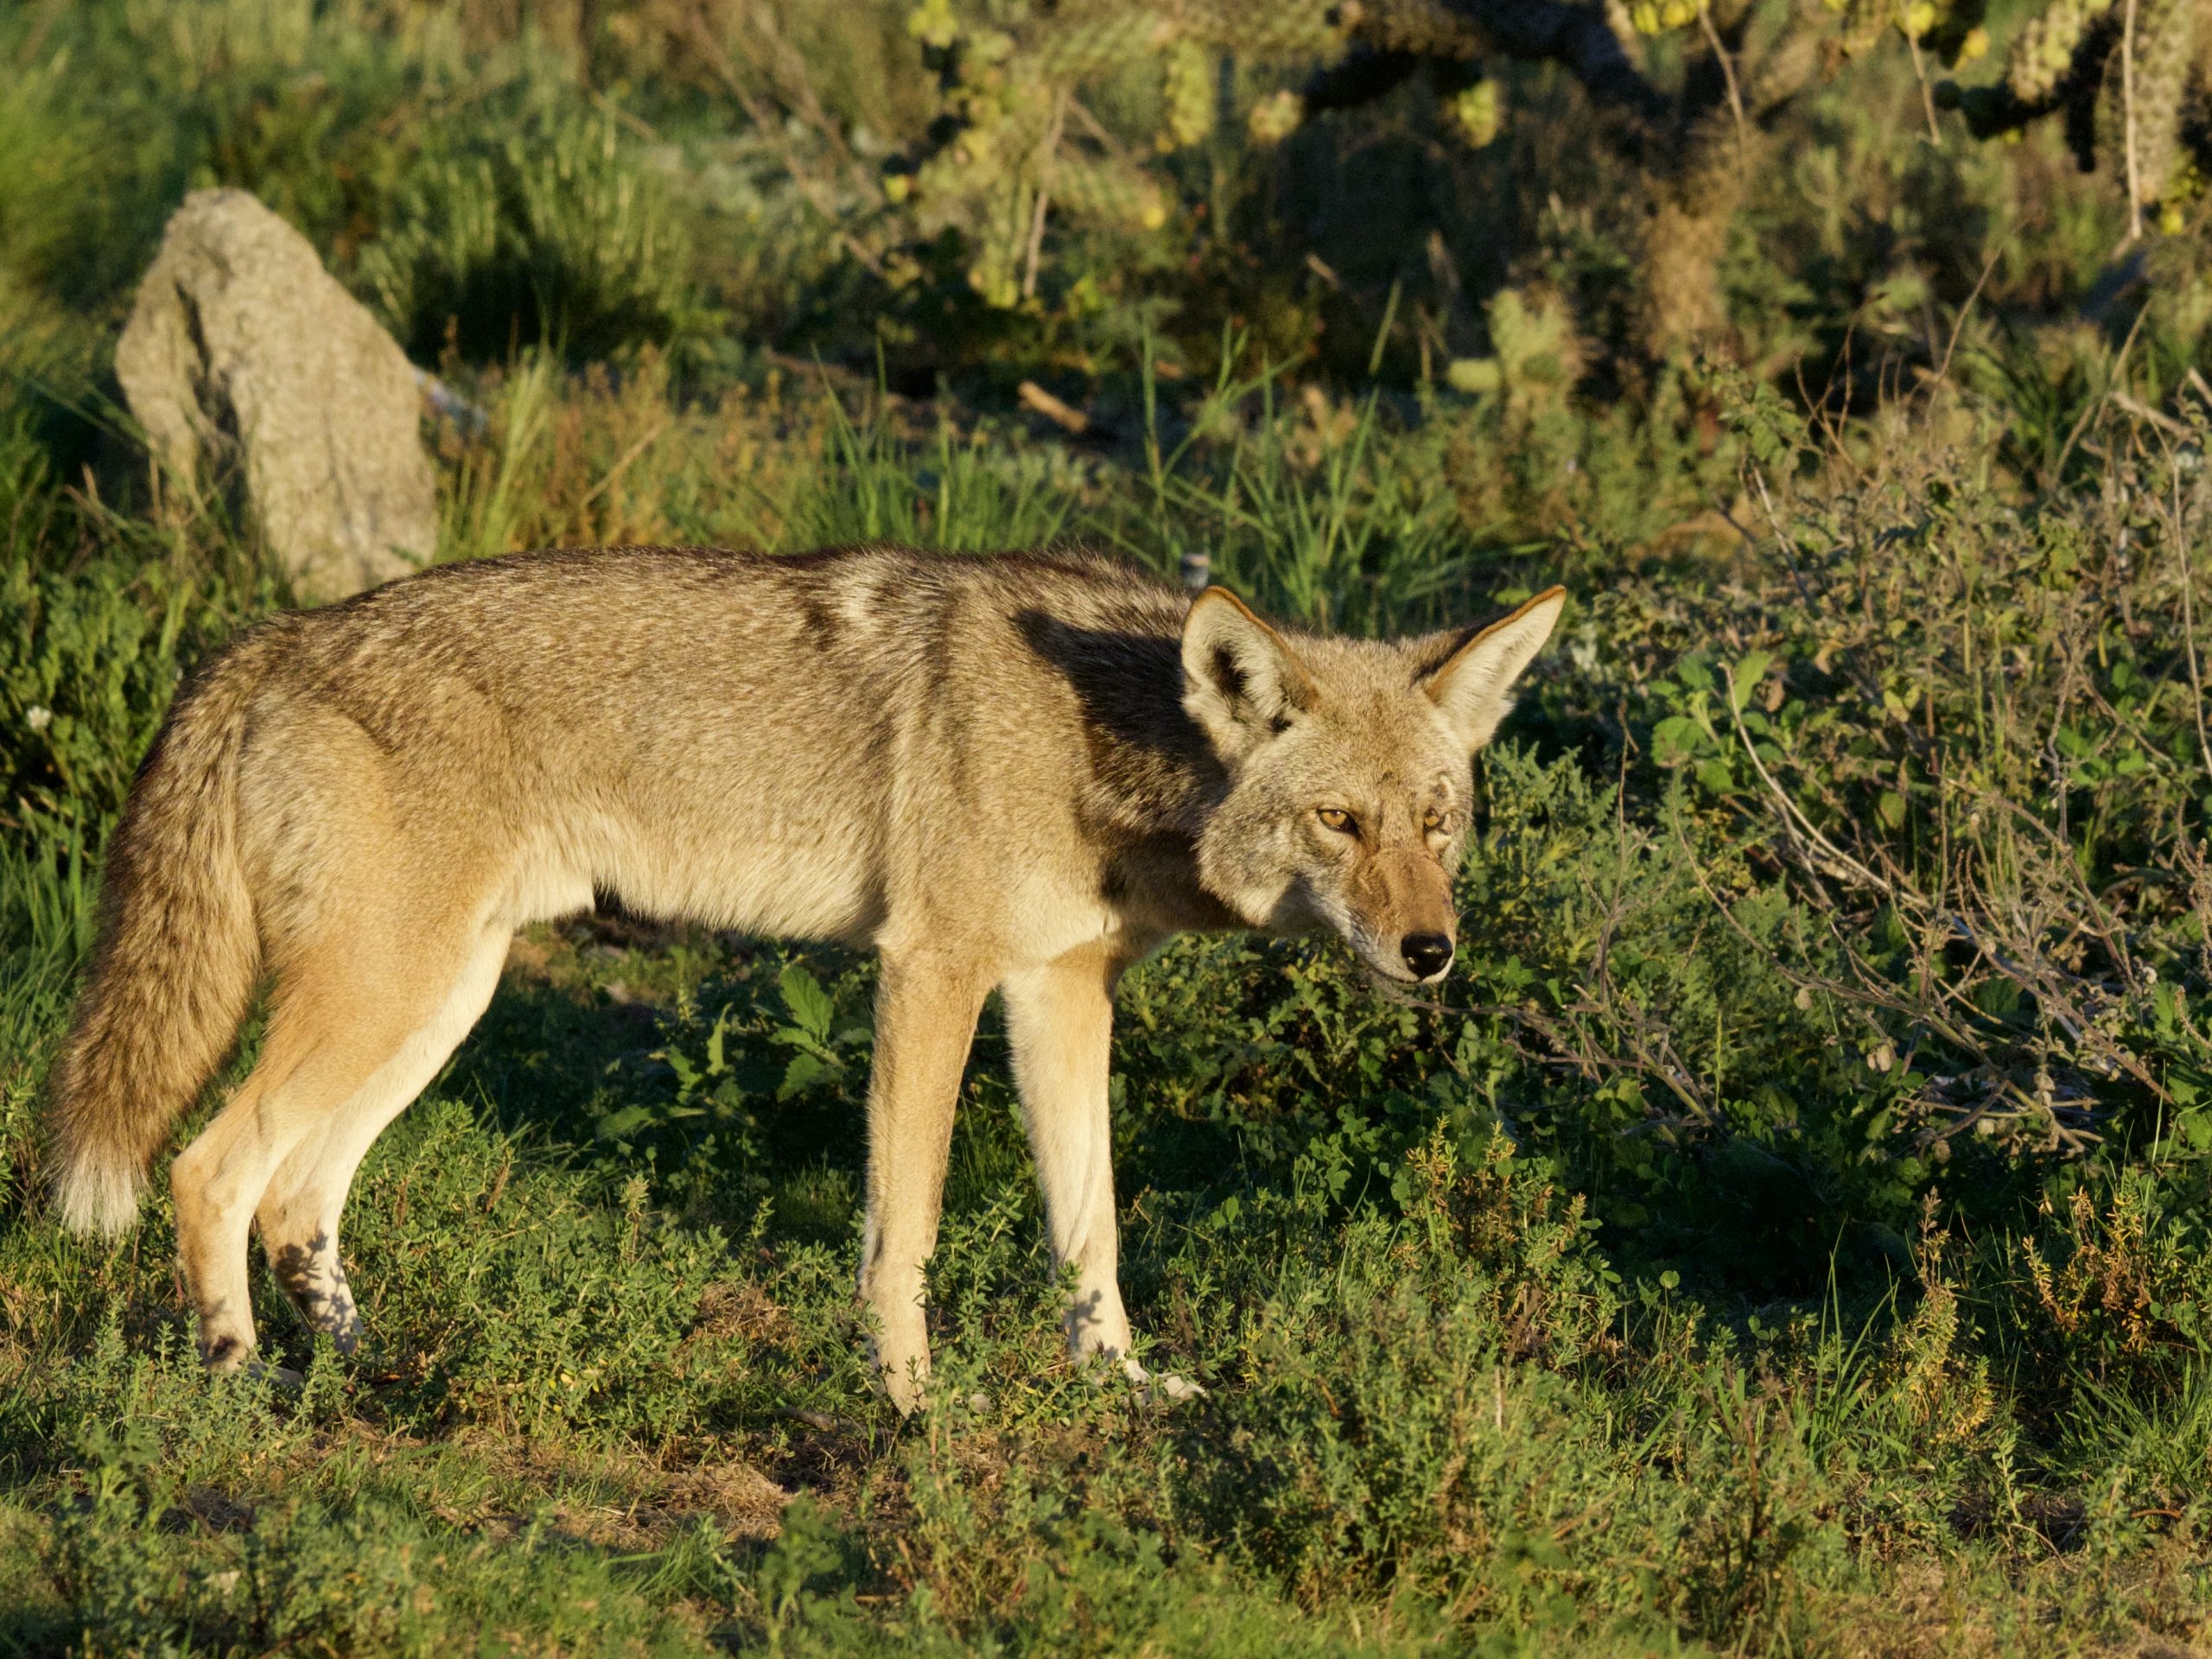 Coyote at Sunset in Bolsa Chica Ecological Reserve